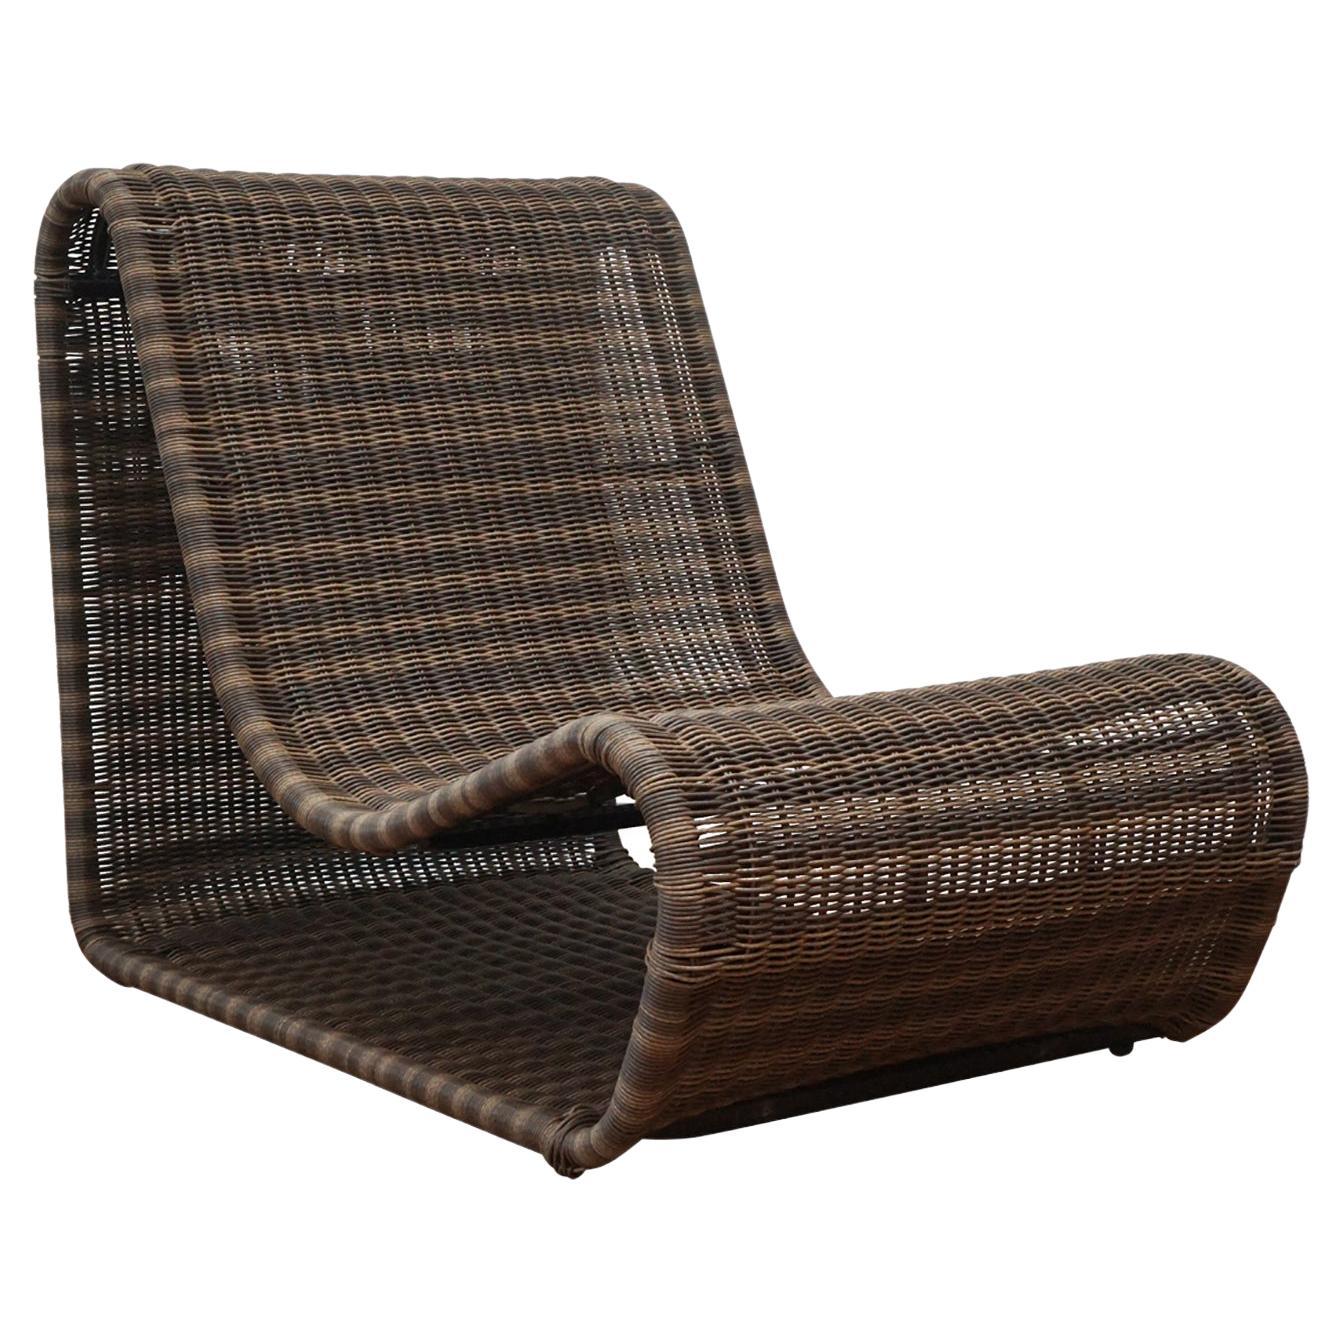 Esperanza Outdoor Lounge Chair in Natural For Sale